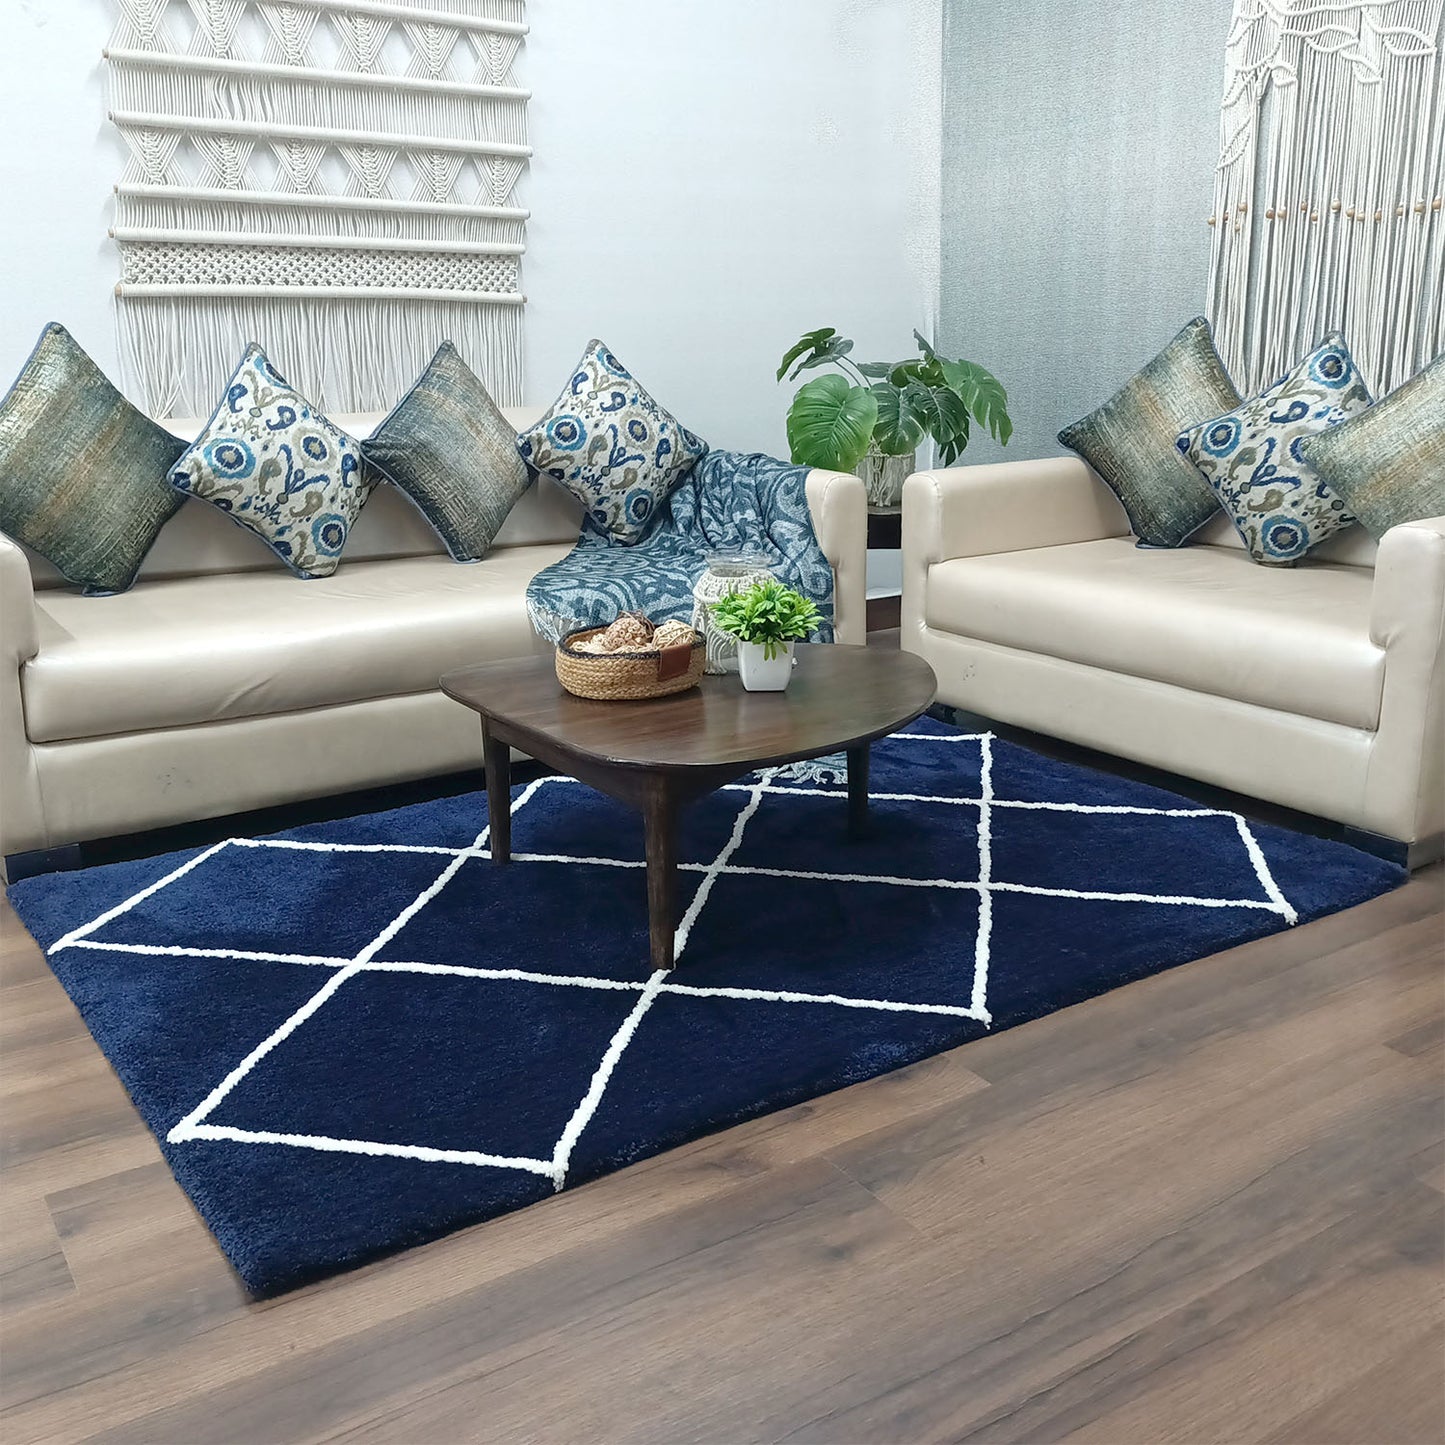 Avioni Home Atlas Collection - Moroccan Style Microfiber Carpet In Navy | Soft, Non-Slip, Easy to Clean